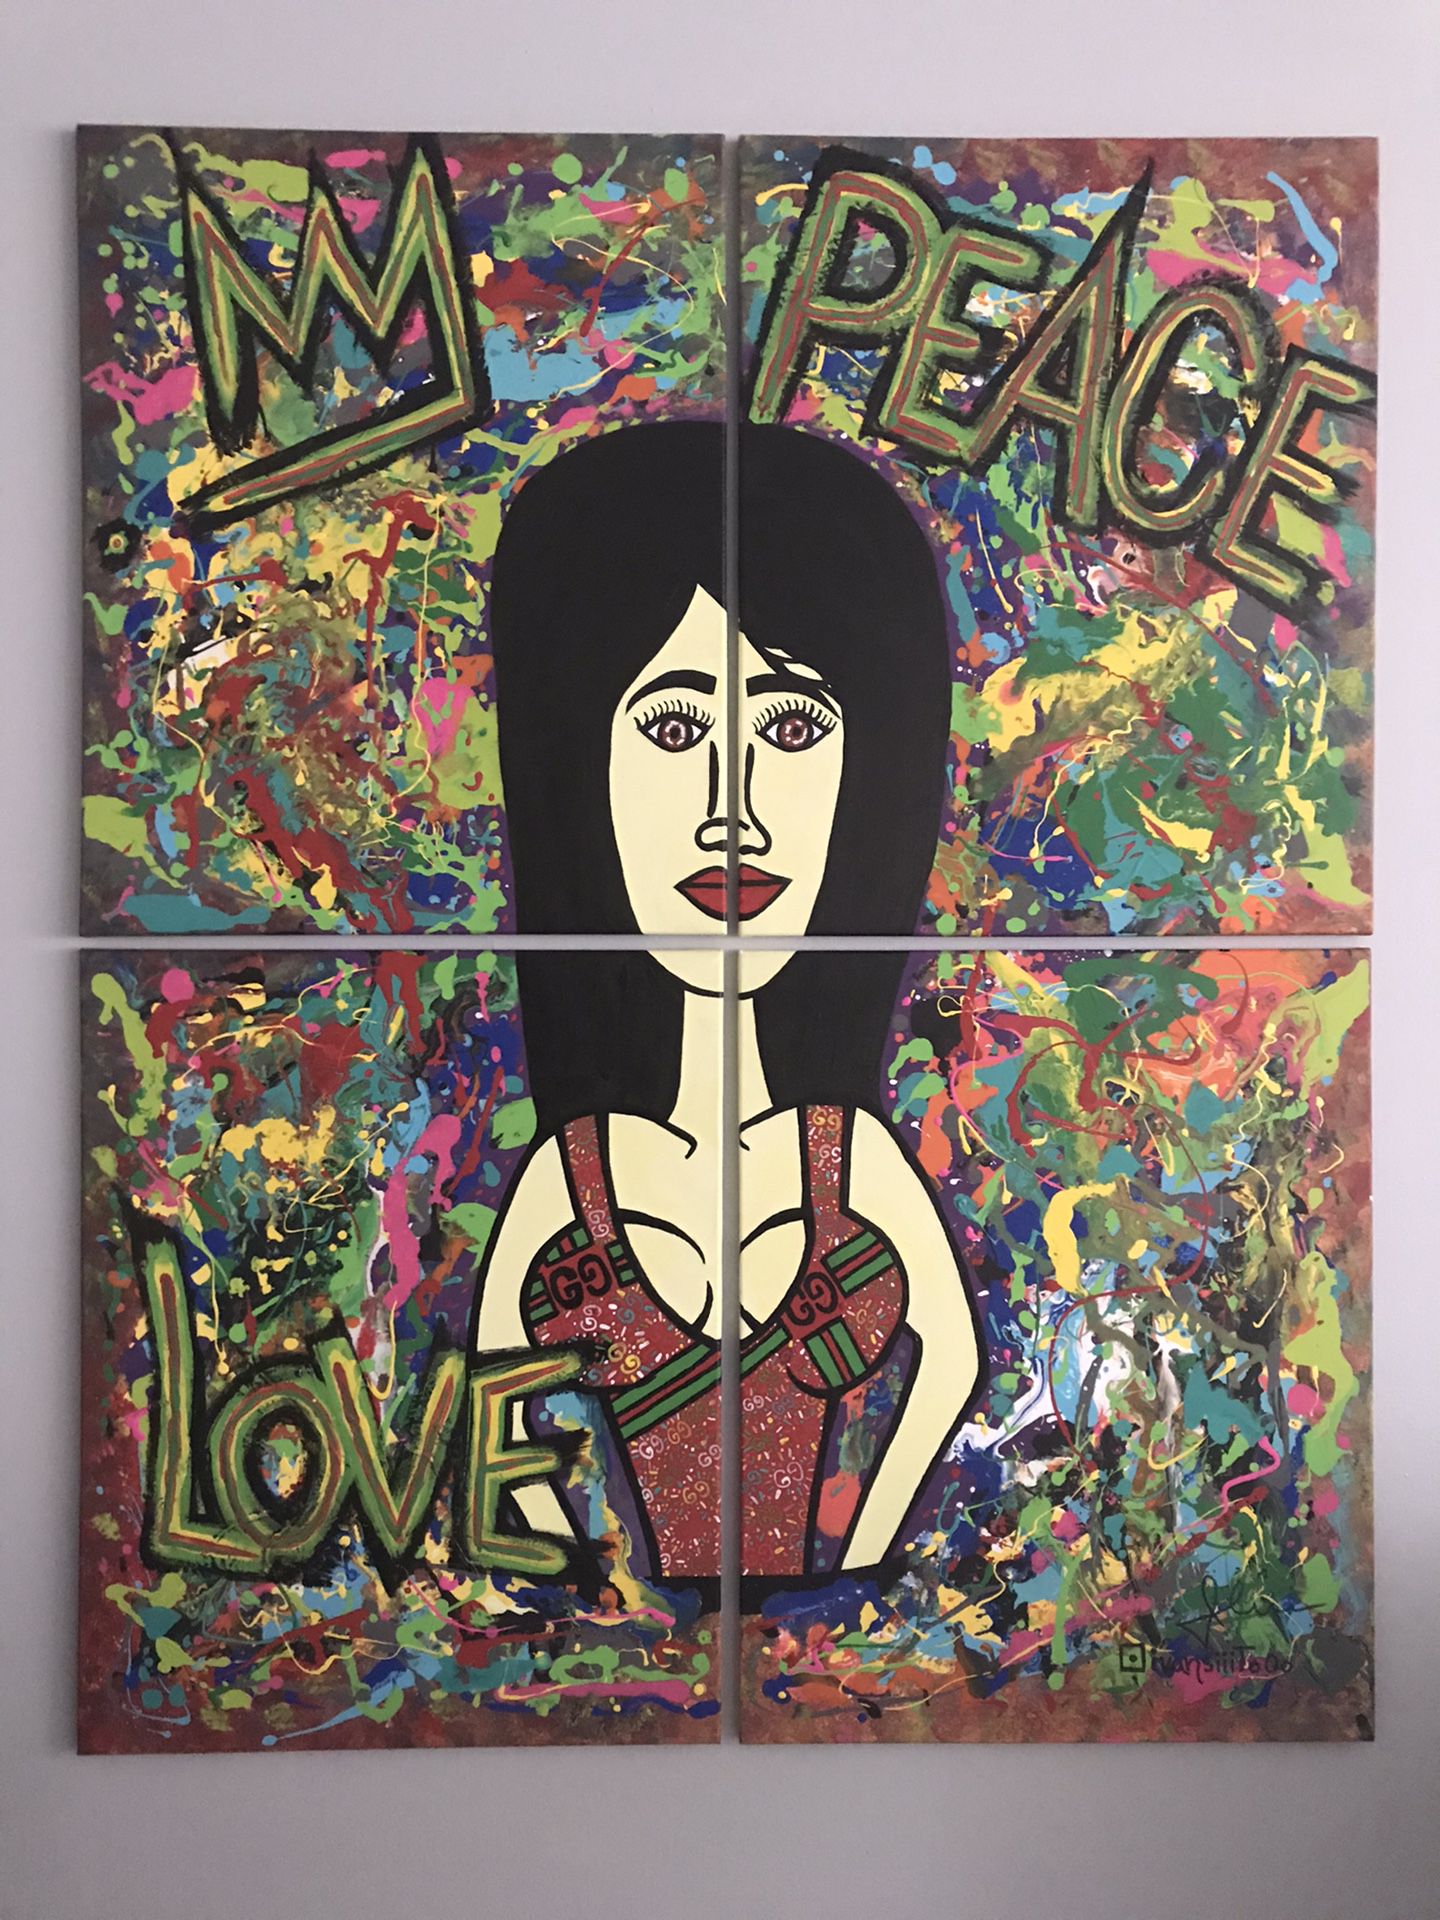 The Gucci girl art peace in 4 canvas